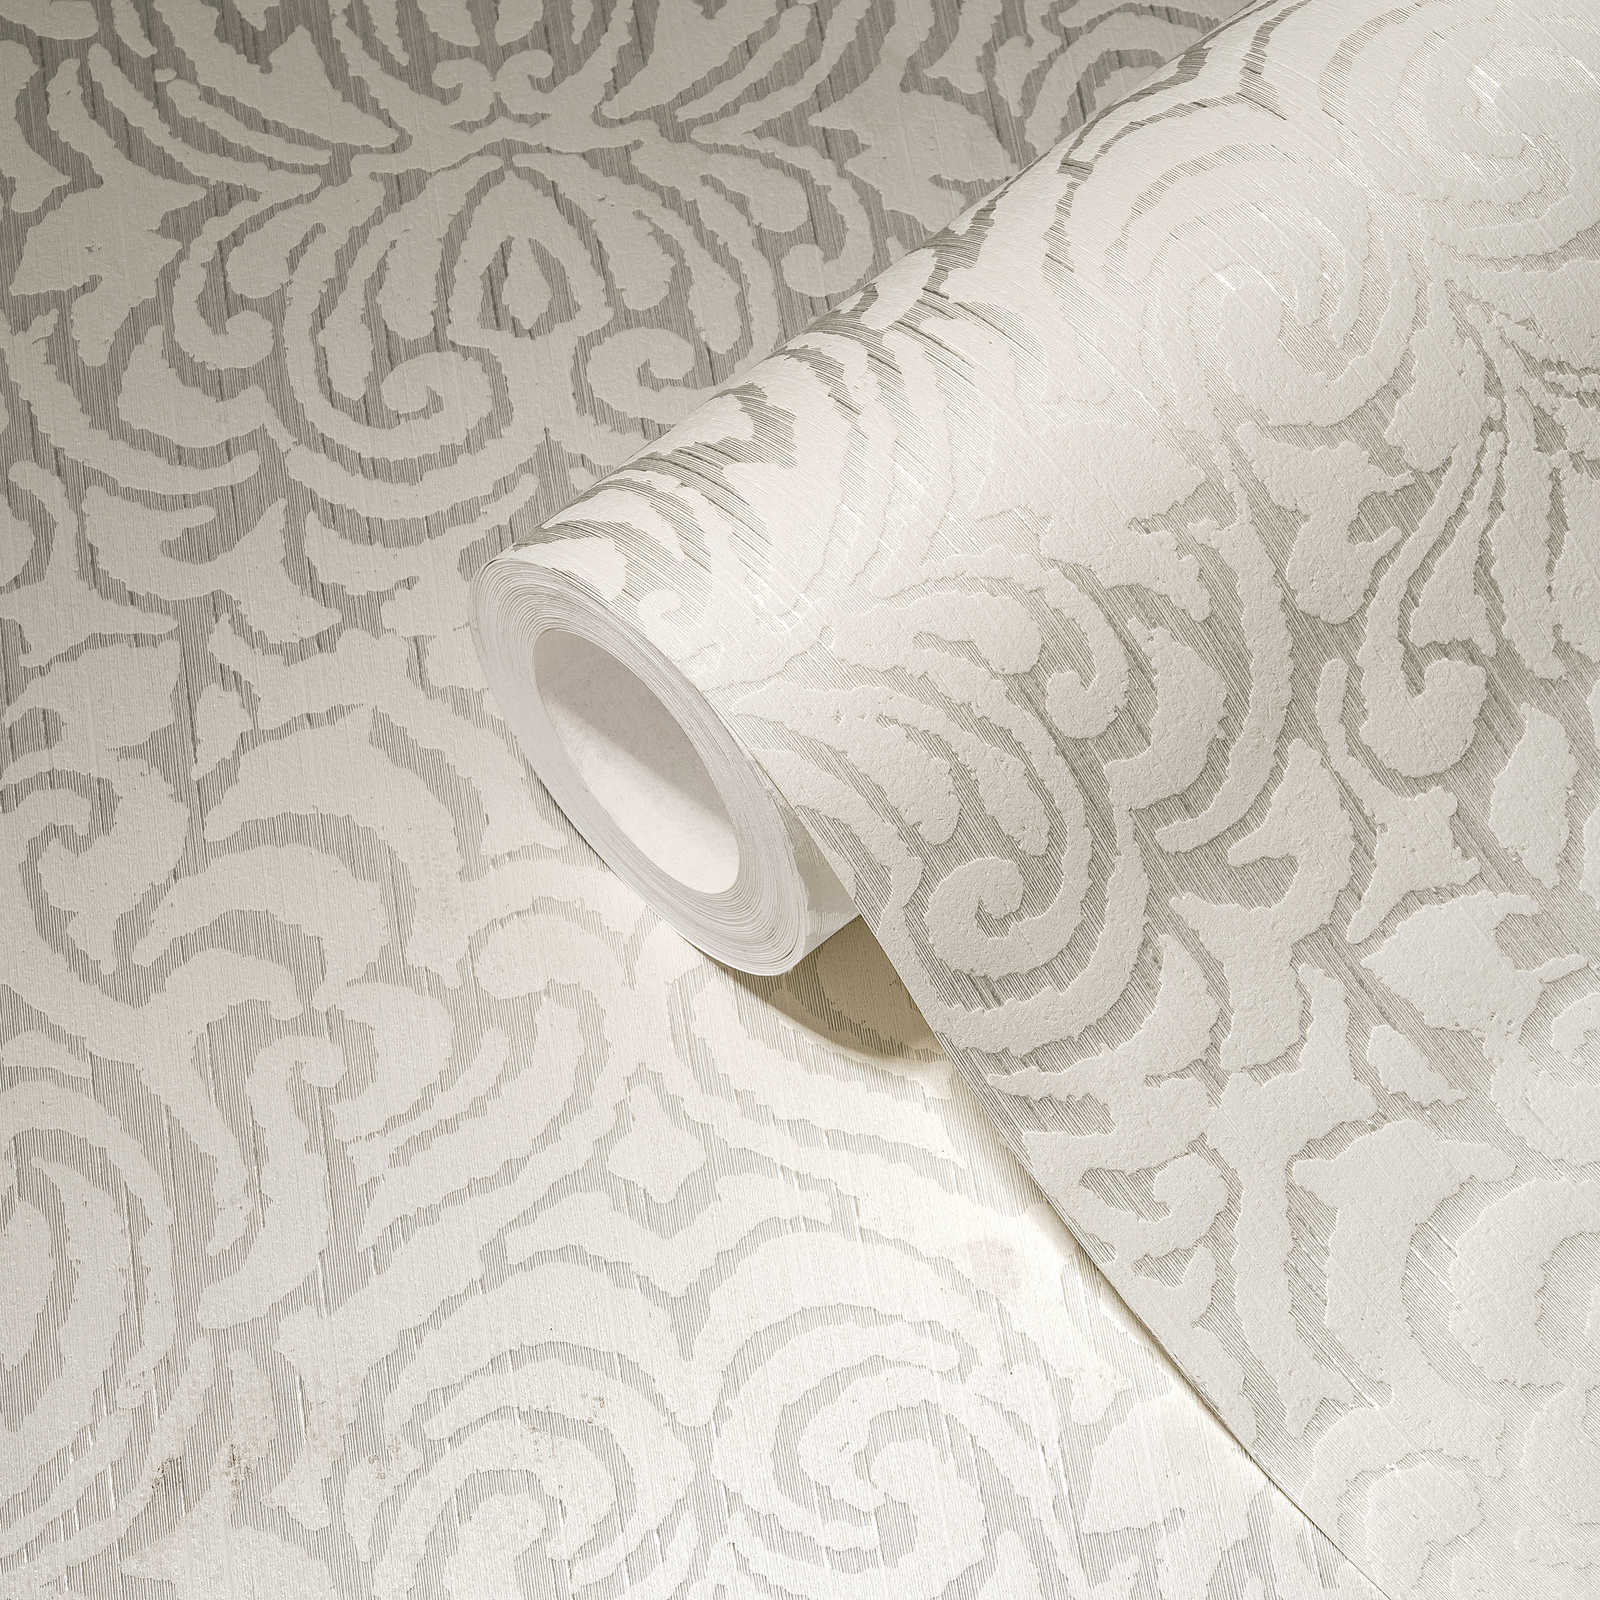             Bright texture wallpaper used look ornaments in vintage style - white
        